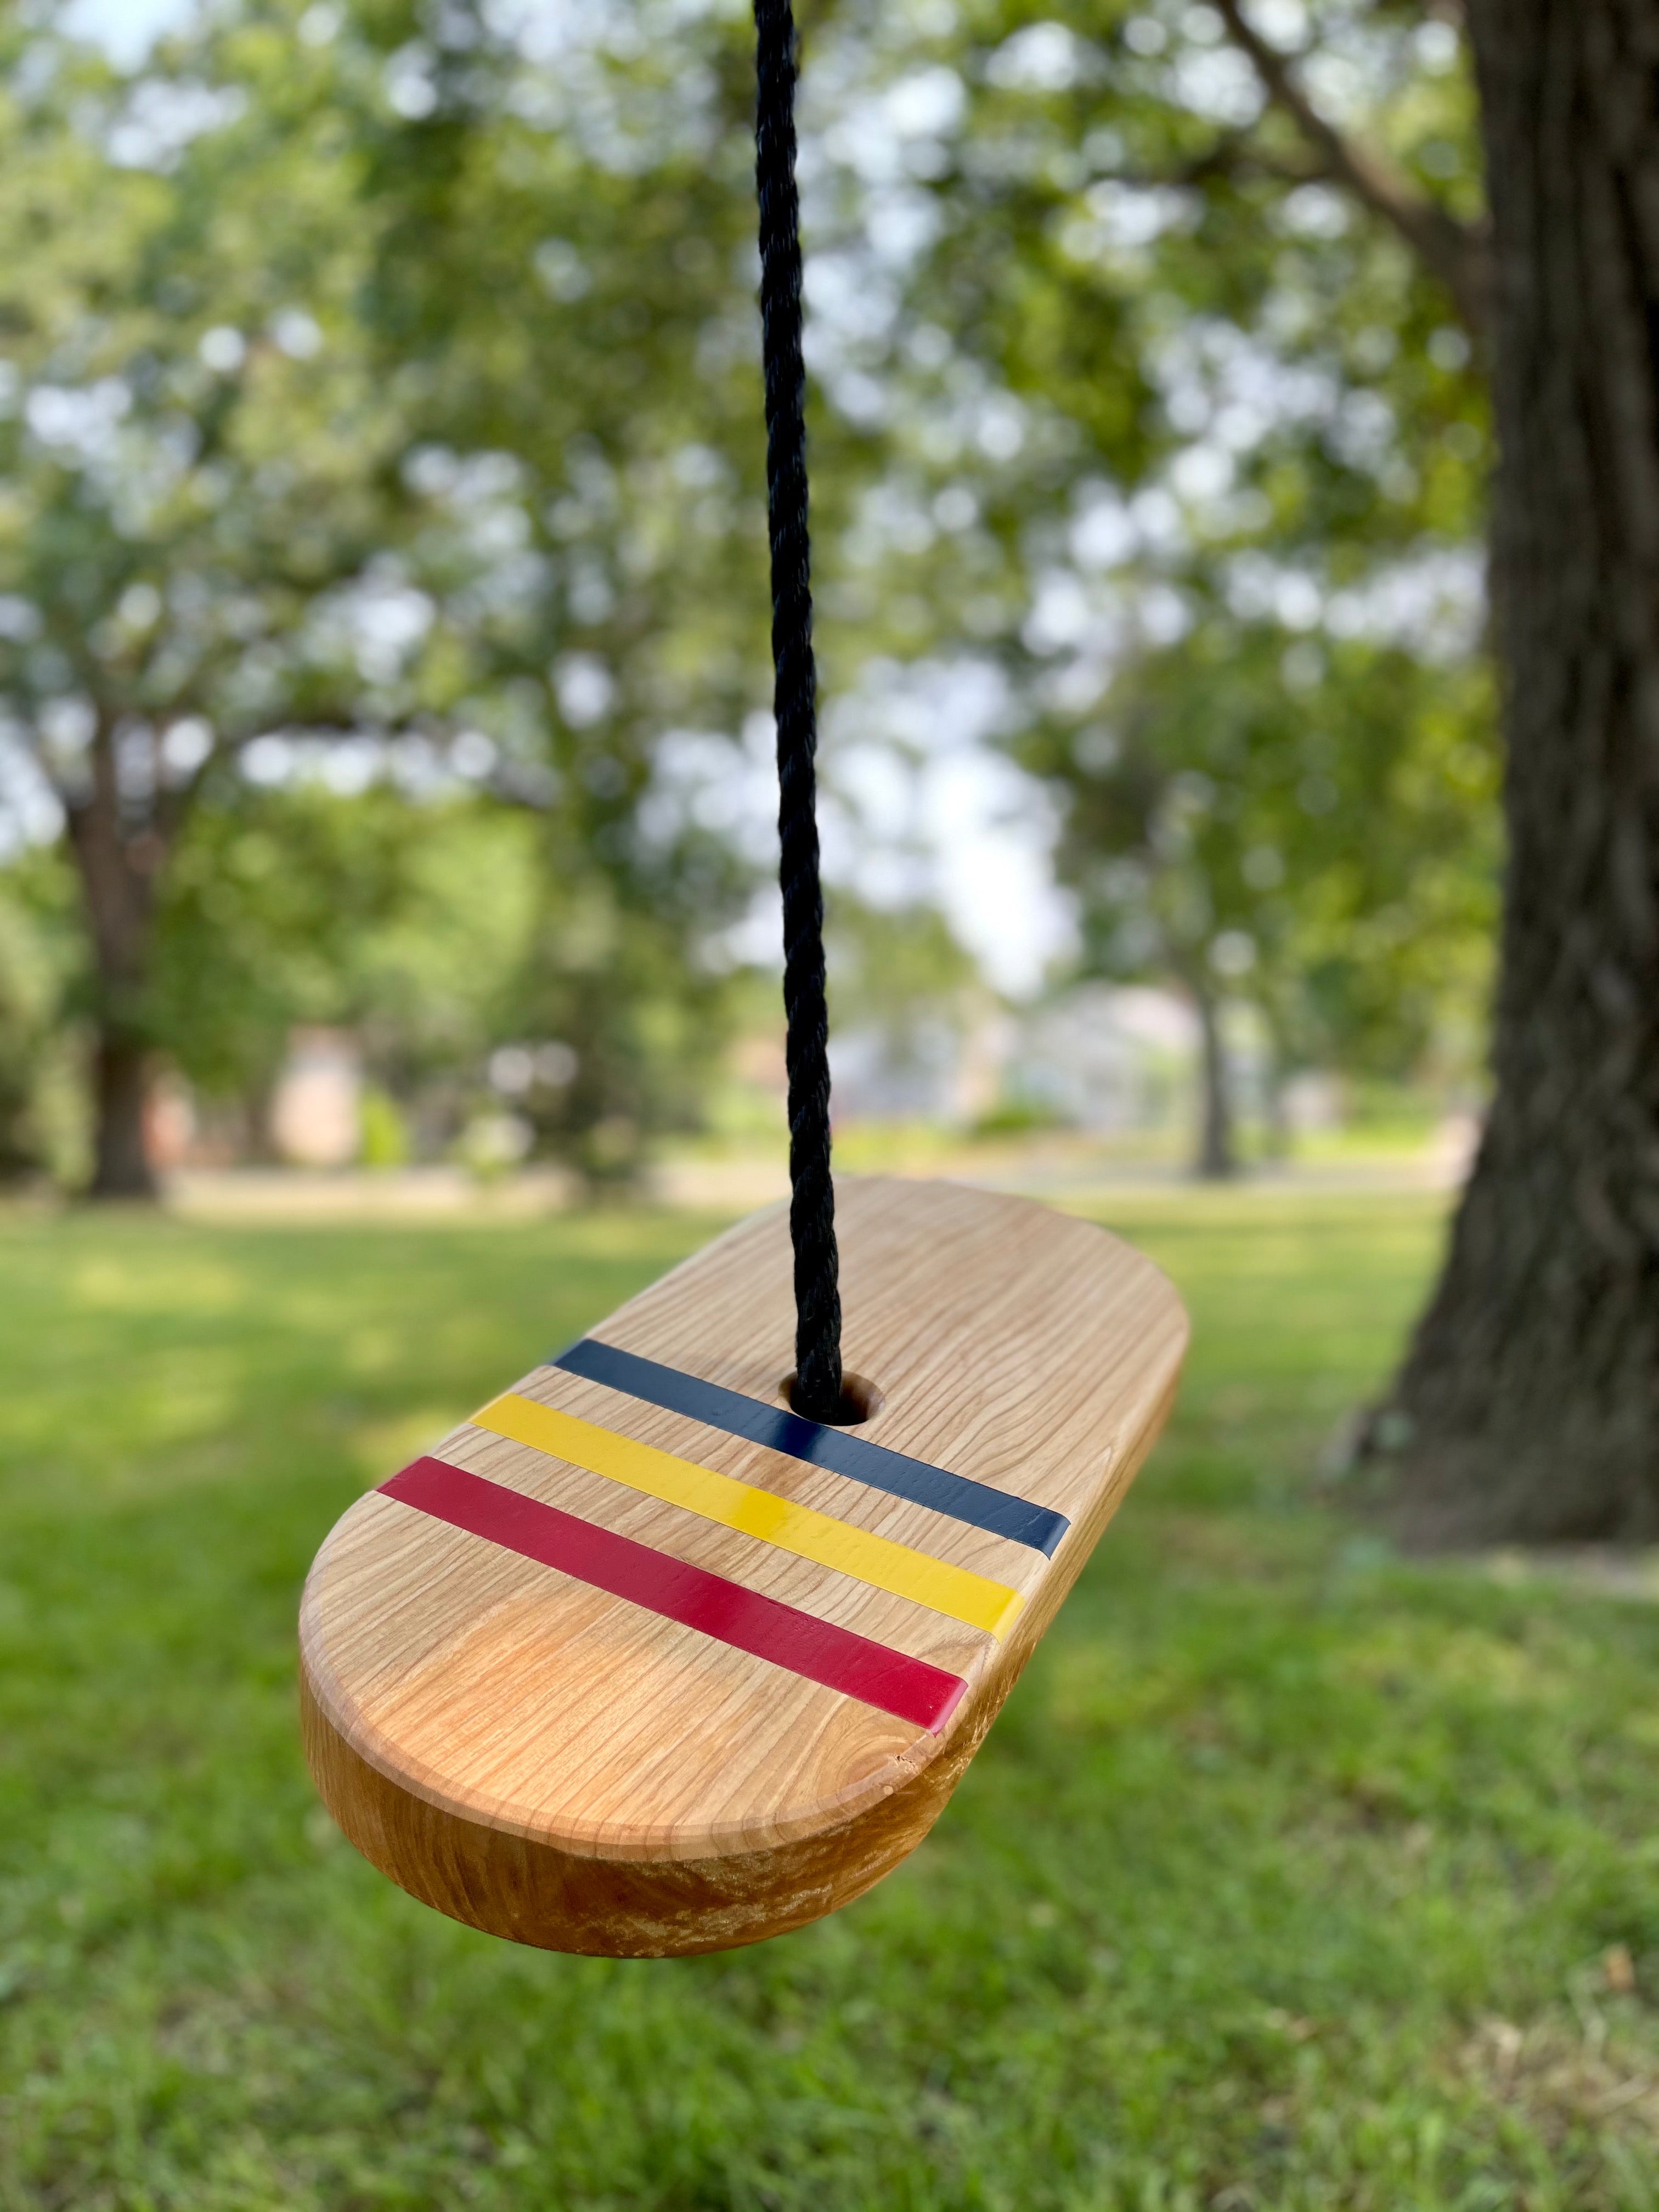 Painted Oval Tree Swing